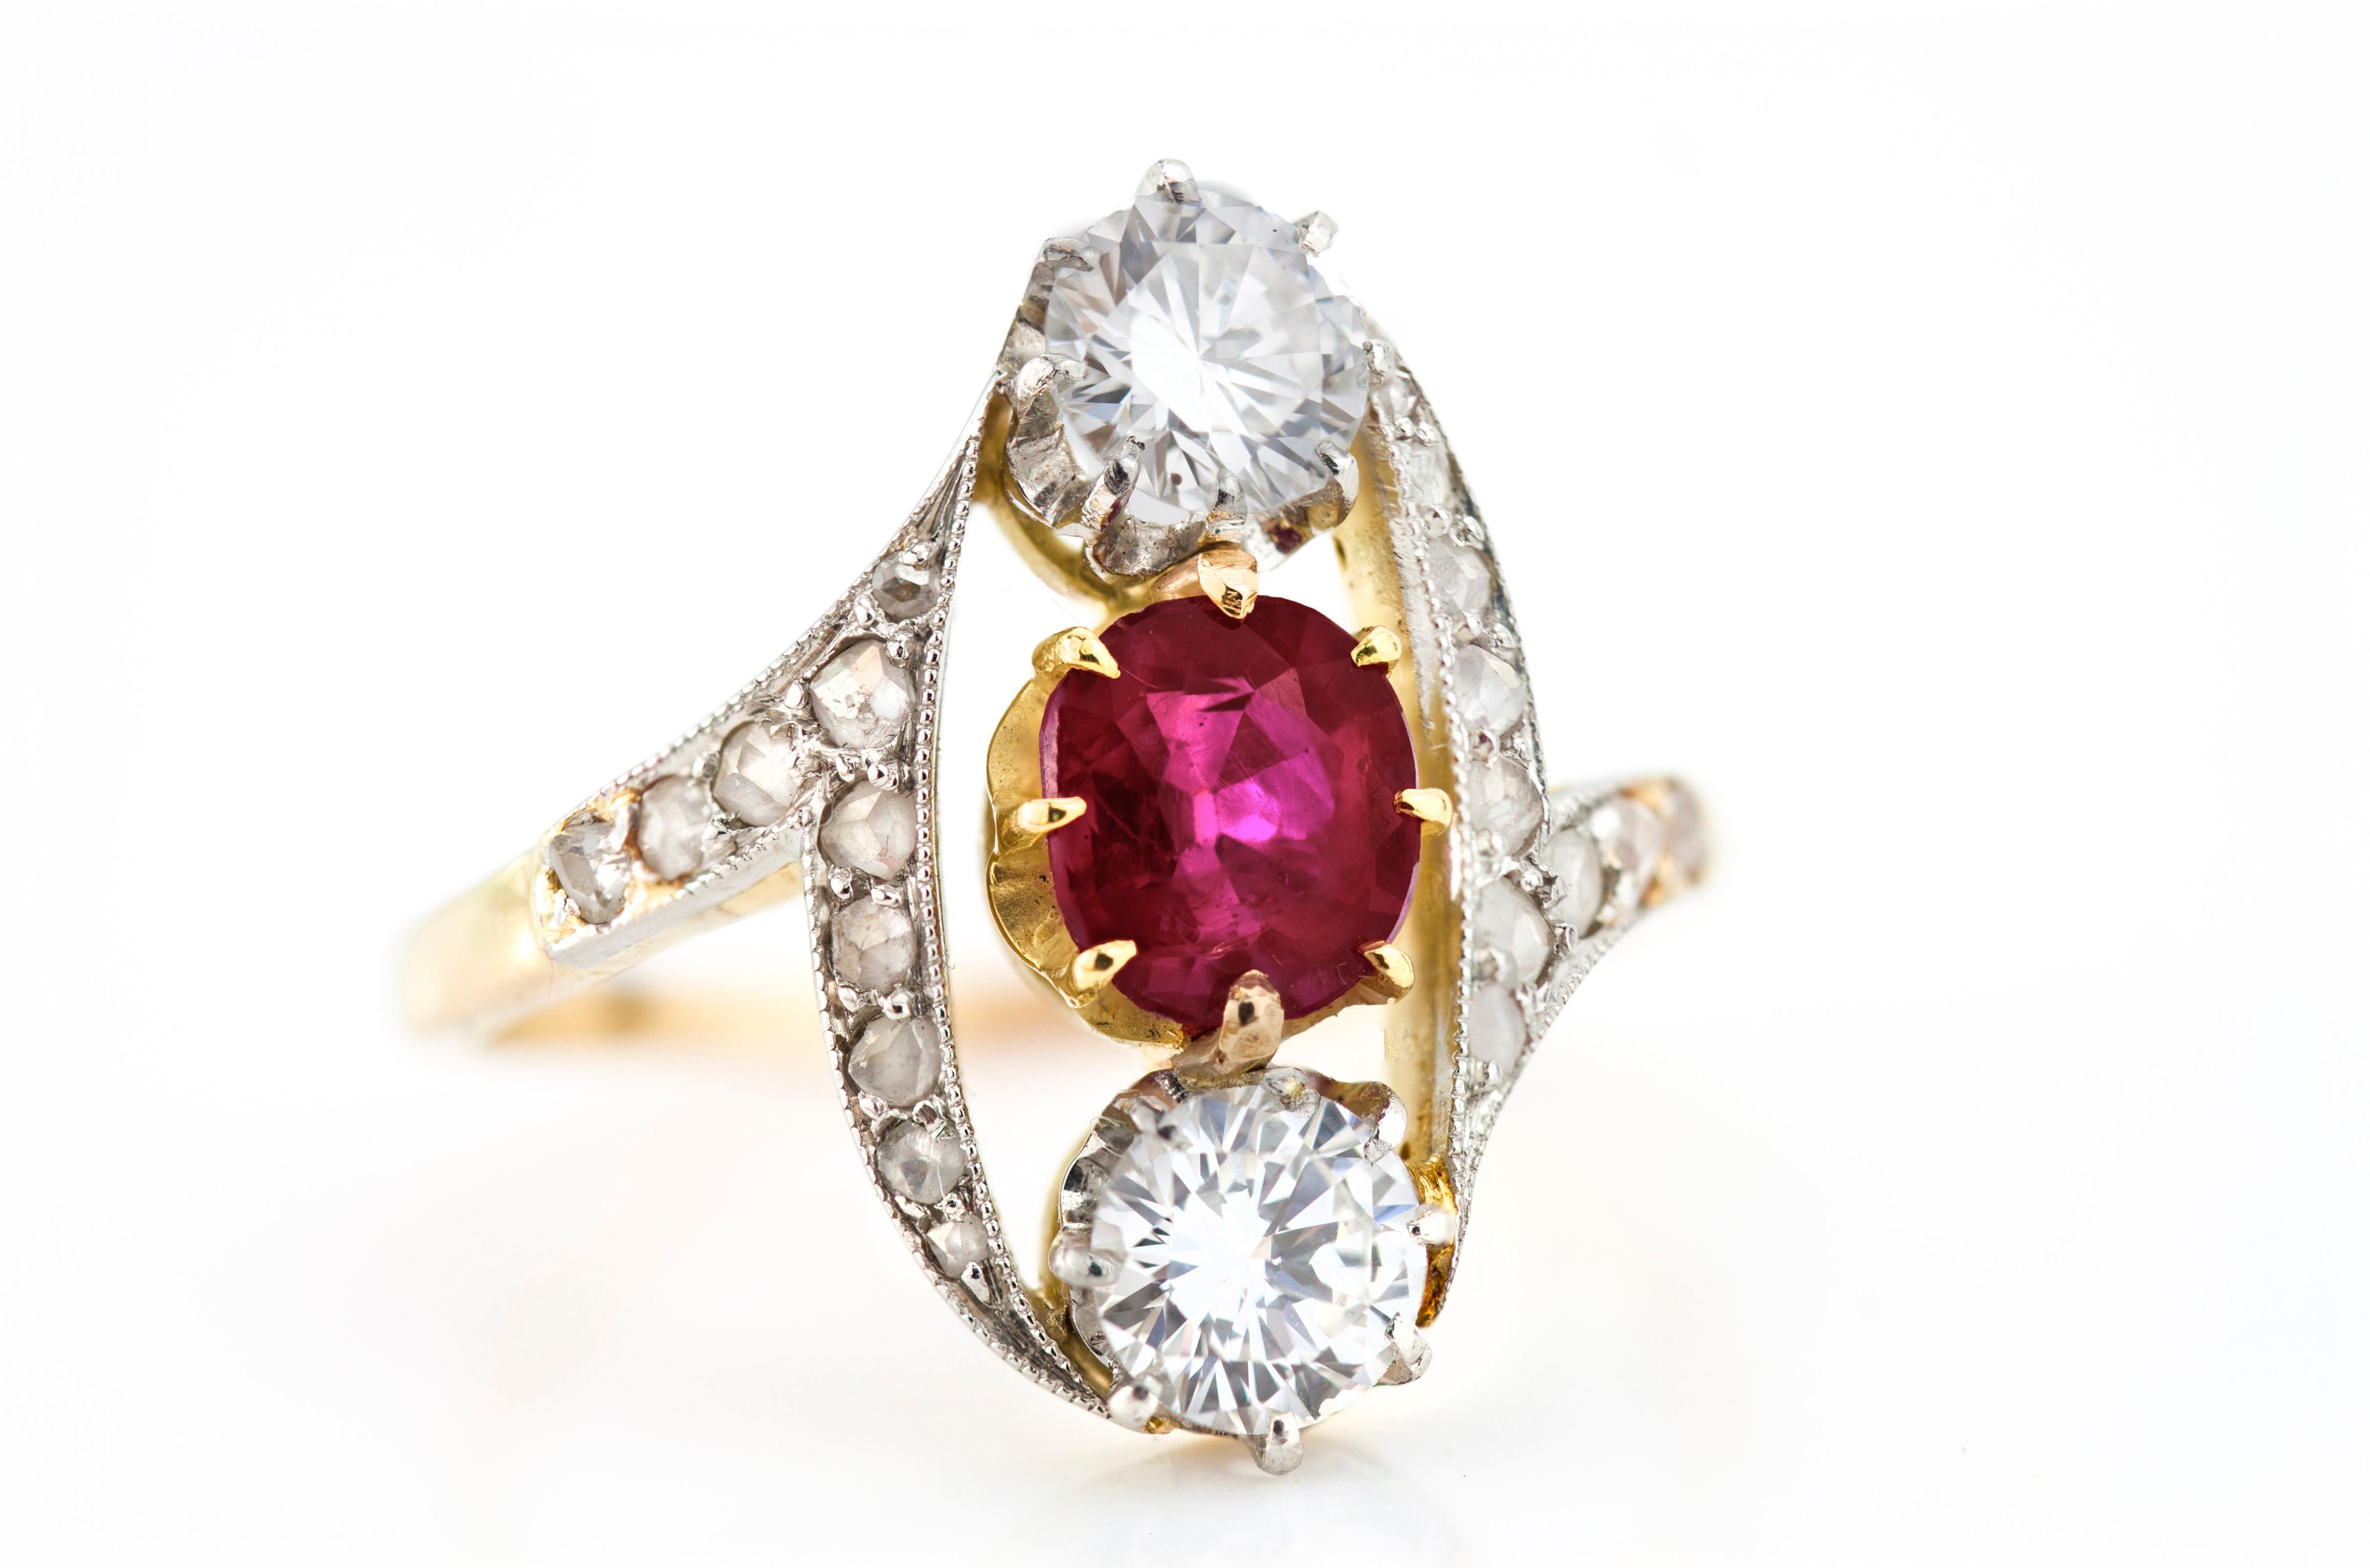 18kt gold ladies ring with natural Burma ruby and diamonds
Ring shank tested positive for 18kt gold.
Ring made in 1960's

Dimensions - 
Weight : 5 grams
Finger Size (UK) = Q (US) = 8 1/2 (EU) = 57 1/2
Size : 2.6 x 2.2 x 2.1 grams

Ruby - 
Cut: